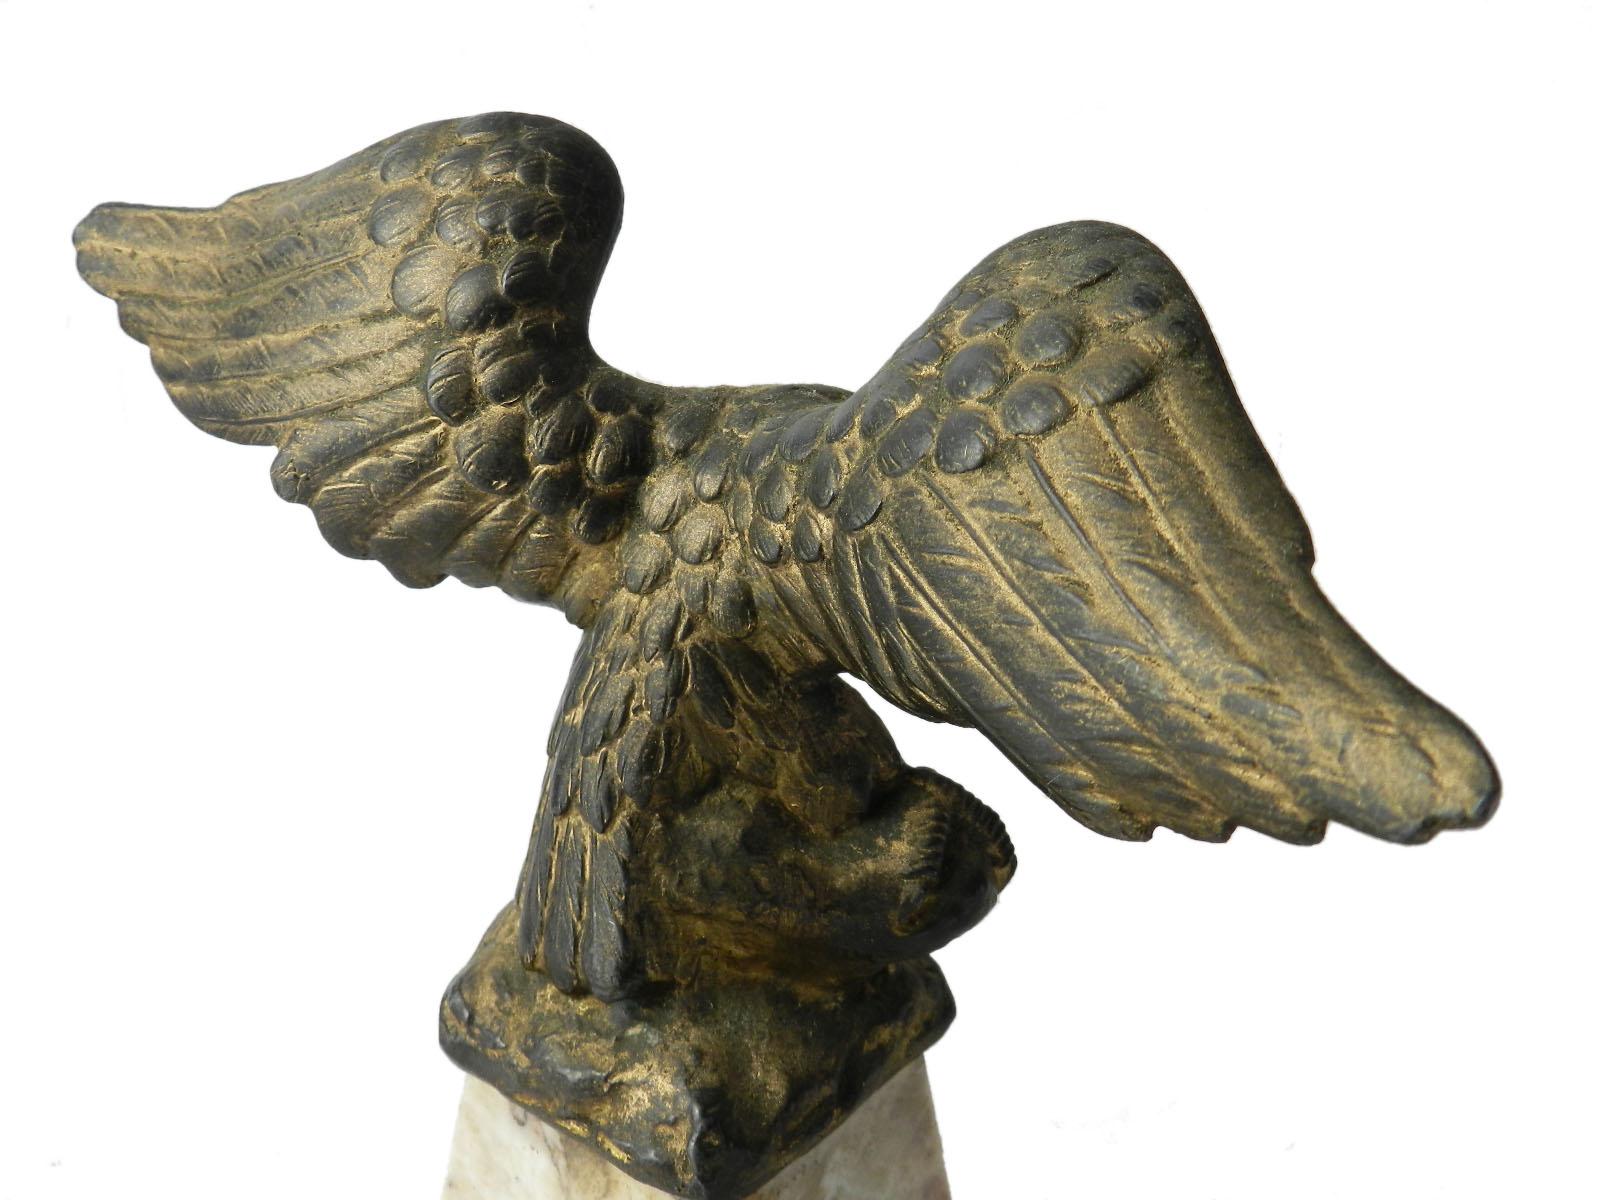 Pocket watch holder stand eagle with snake in beak
Pocket watch hooks on to the snake
French early 20th century
Marble base with only very minor marks of wear nothing distracting
Gilded Spelter which has good aged patina
Gold has faded slightly